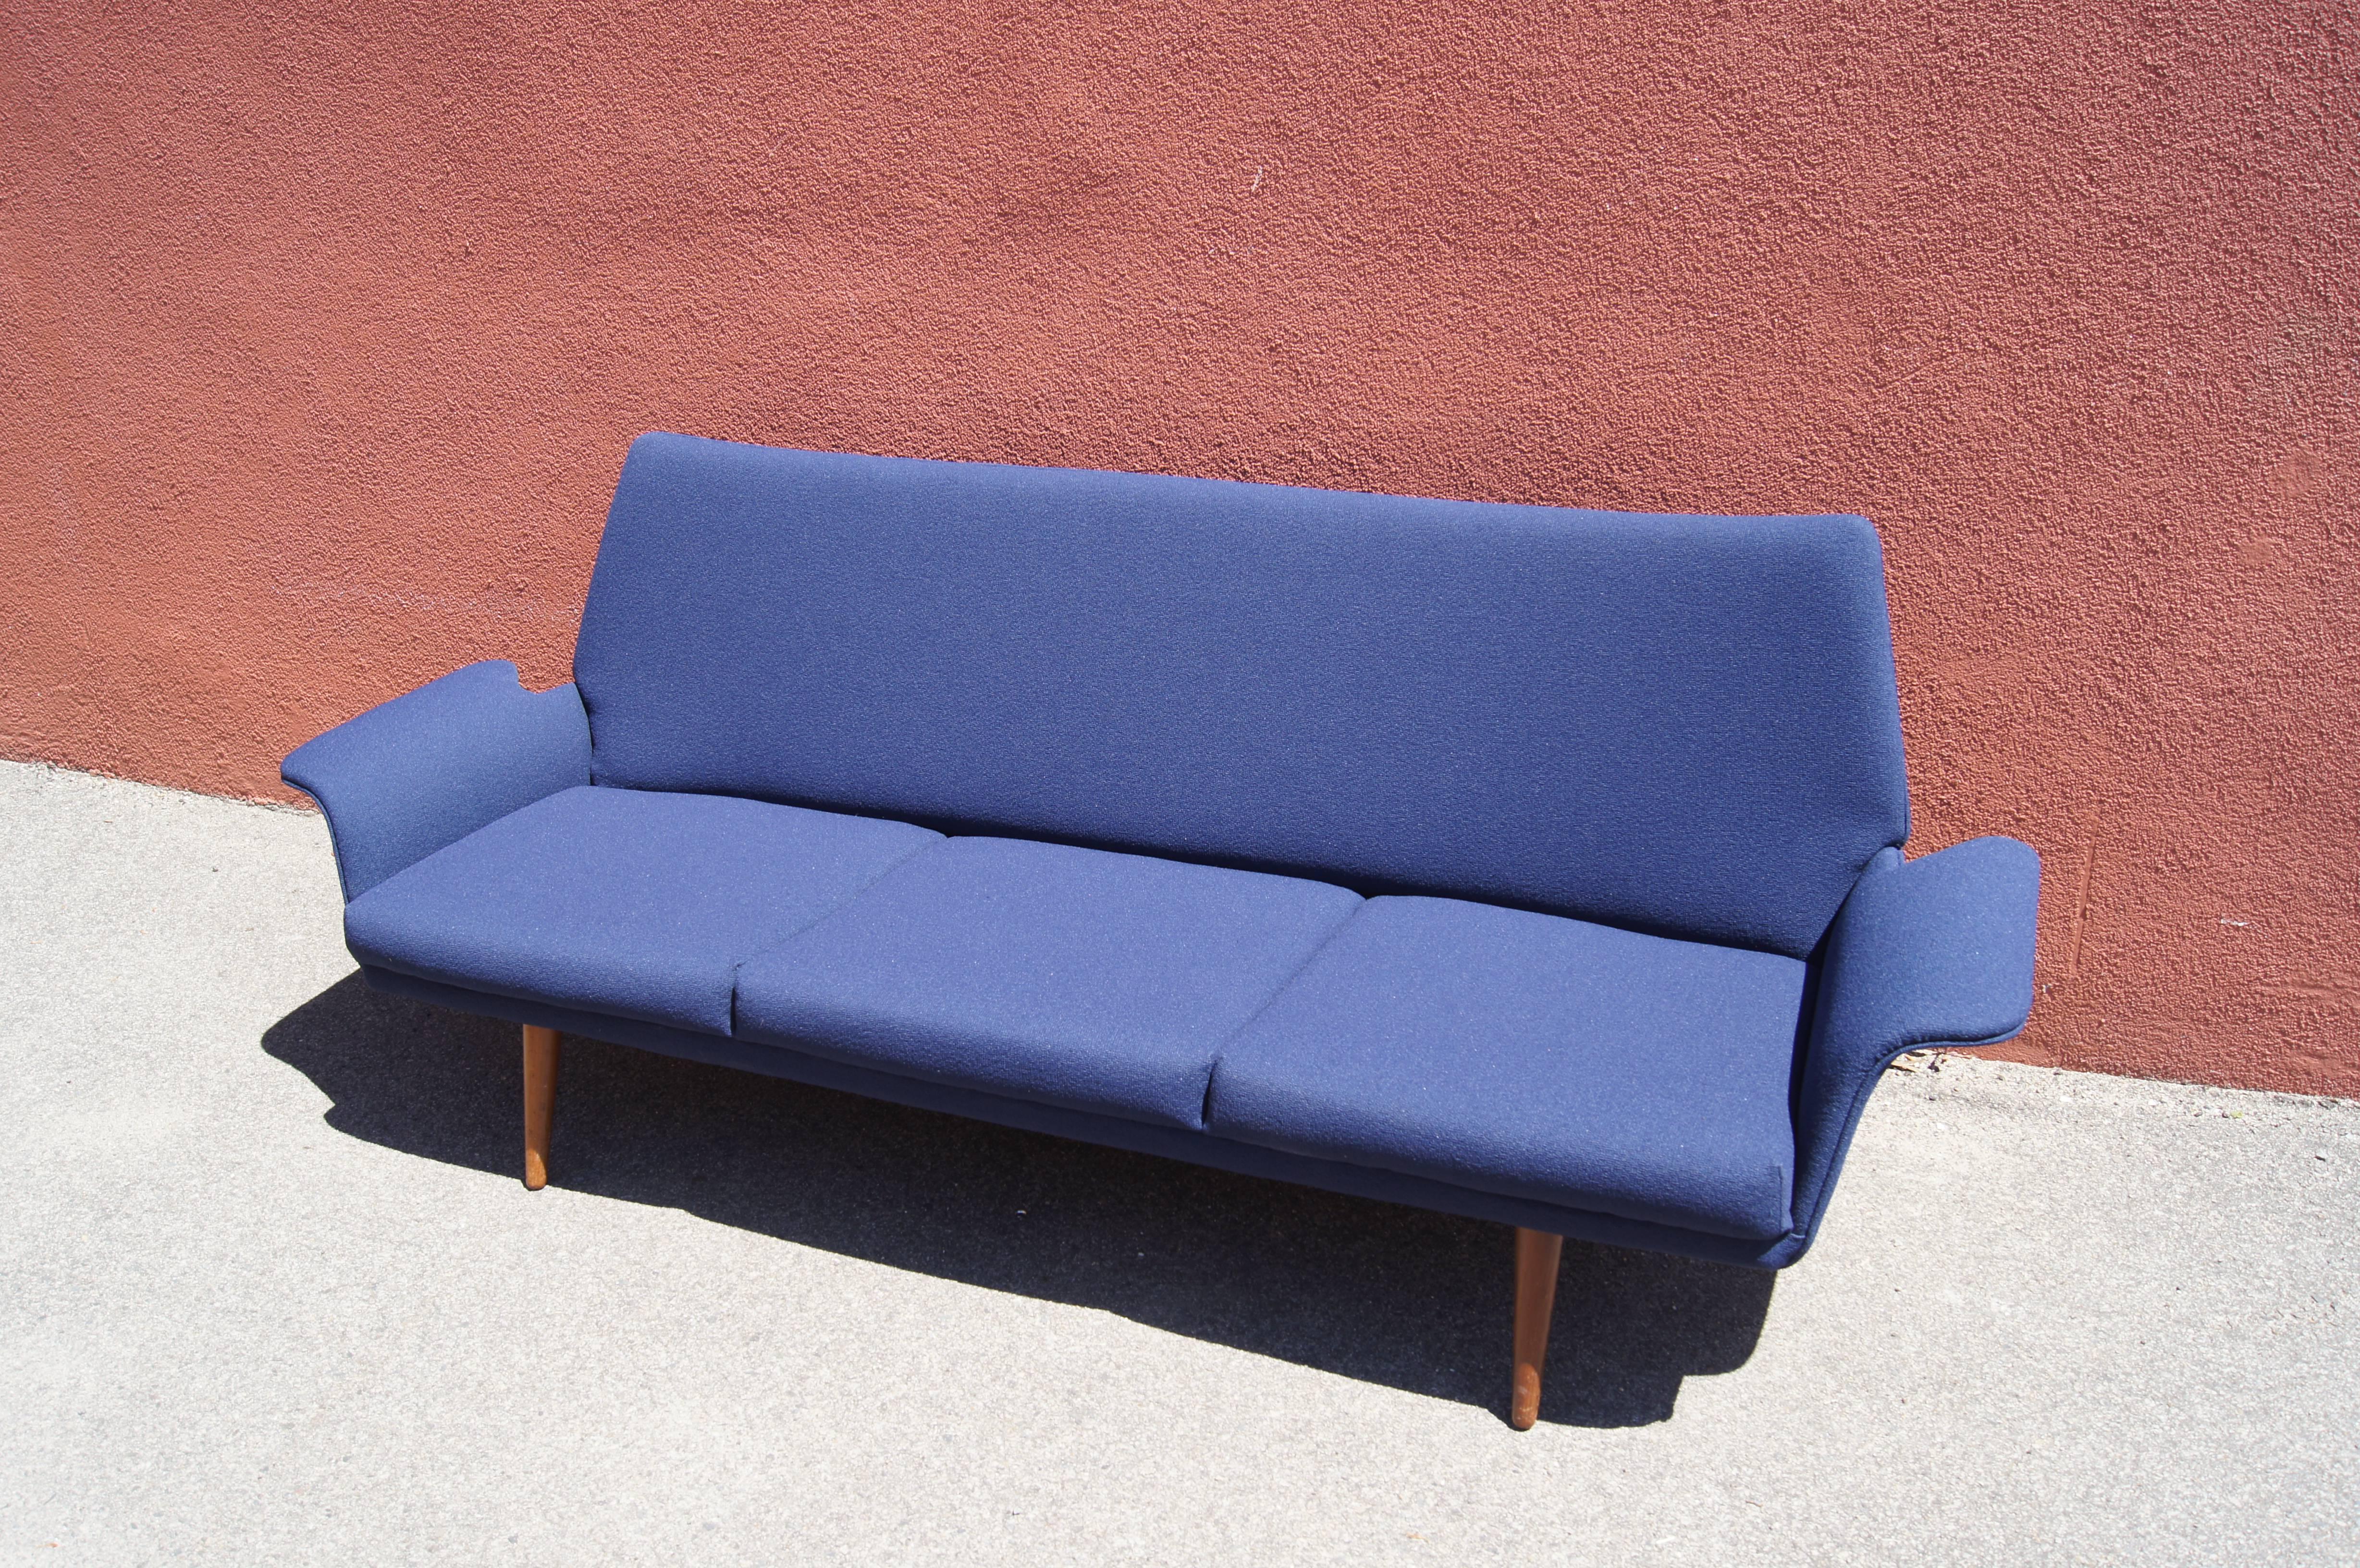 A wonderful example of Danish modern design, this three-seat sofa rests lightly on splayed legs. Its playfully curved frame has been newly upholstered in Knoll's Swing textile in Banker Blue.